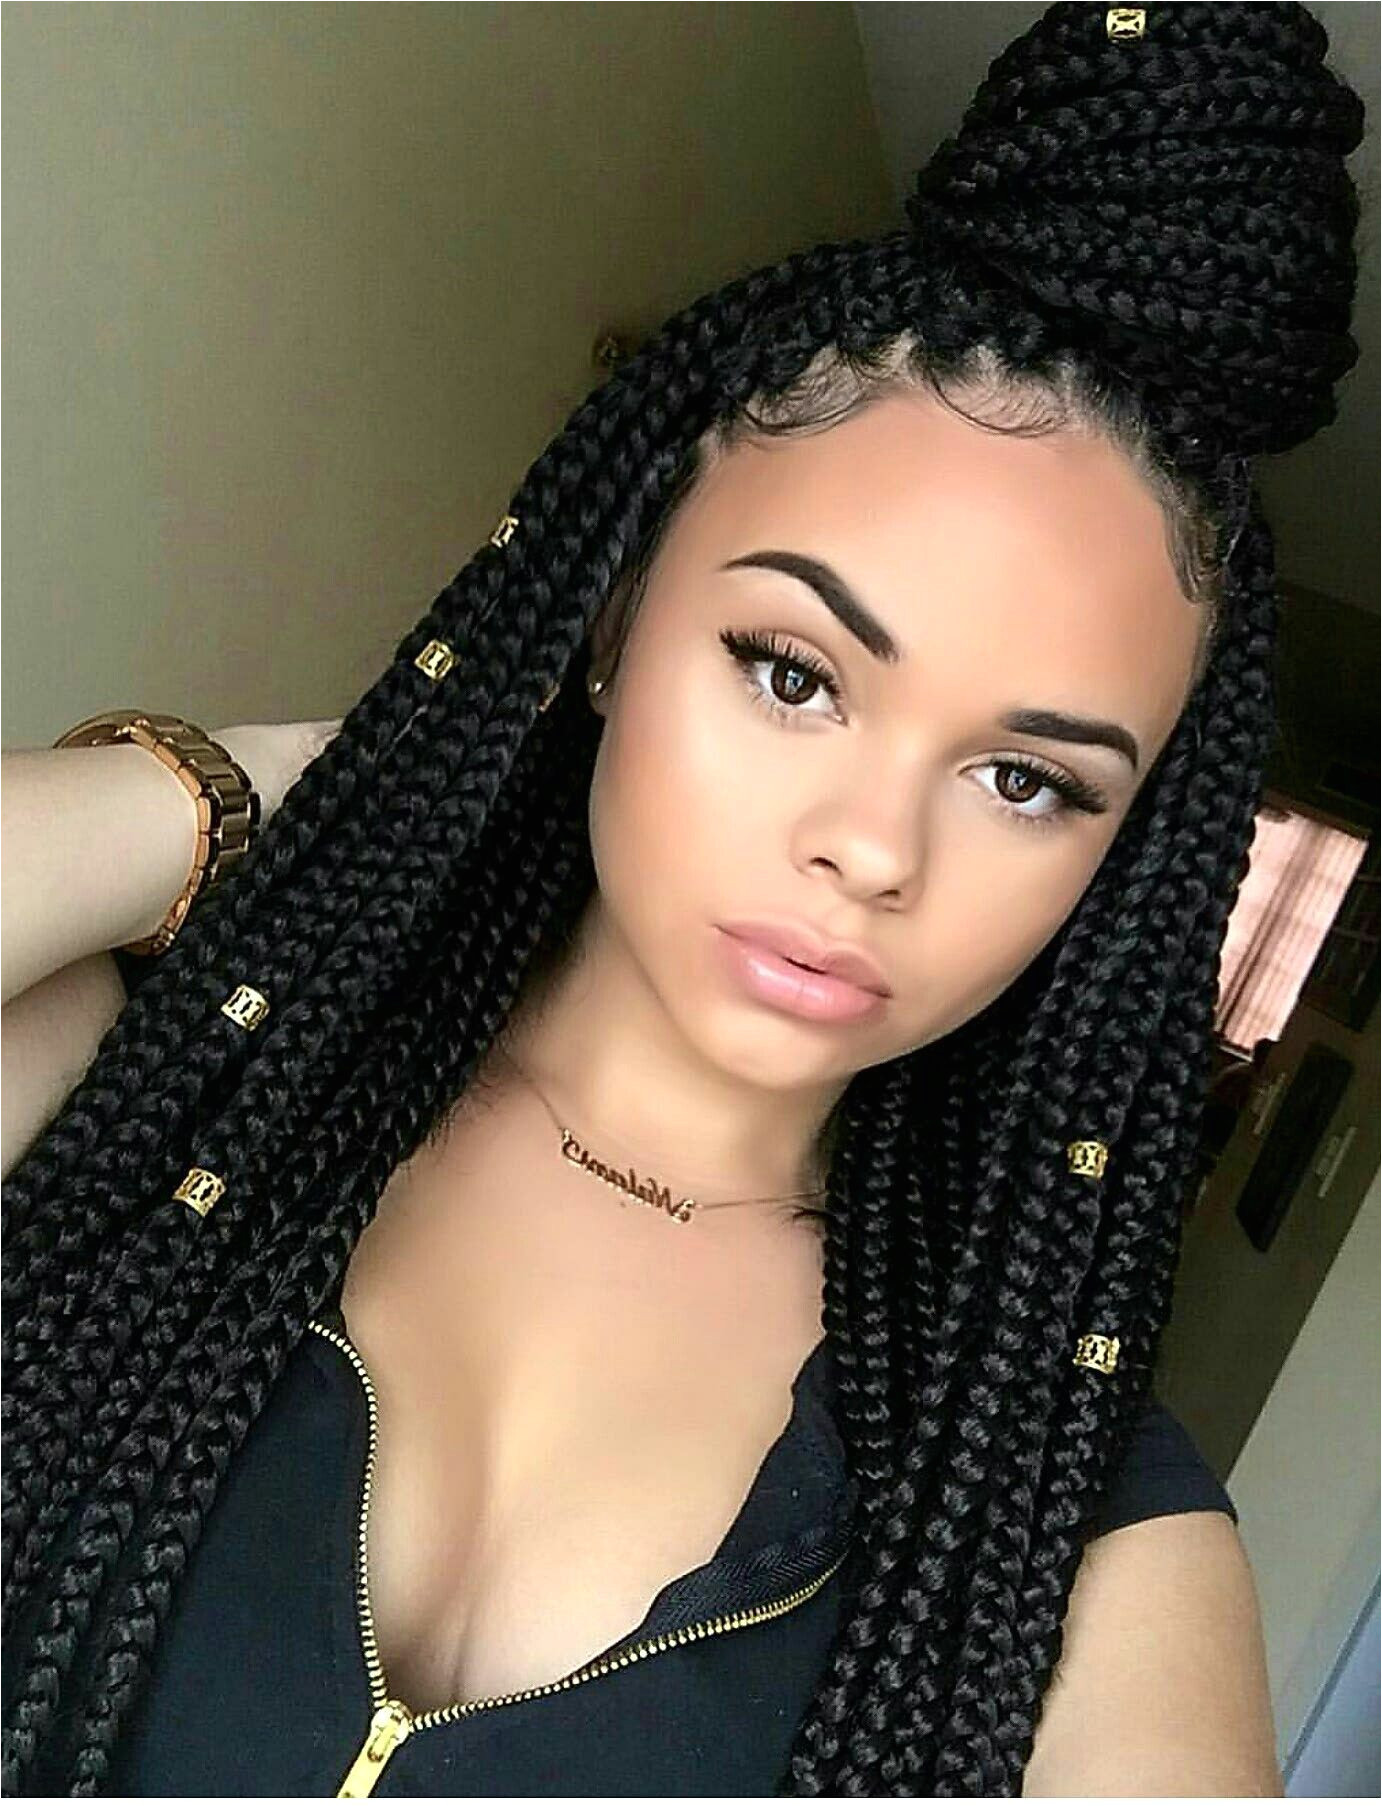 taraivia her ig is therealmami Box Braids Styling Hairstyles For Box Braids